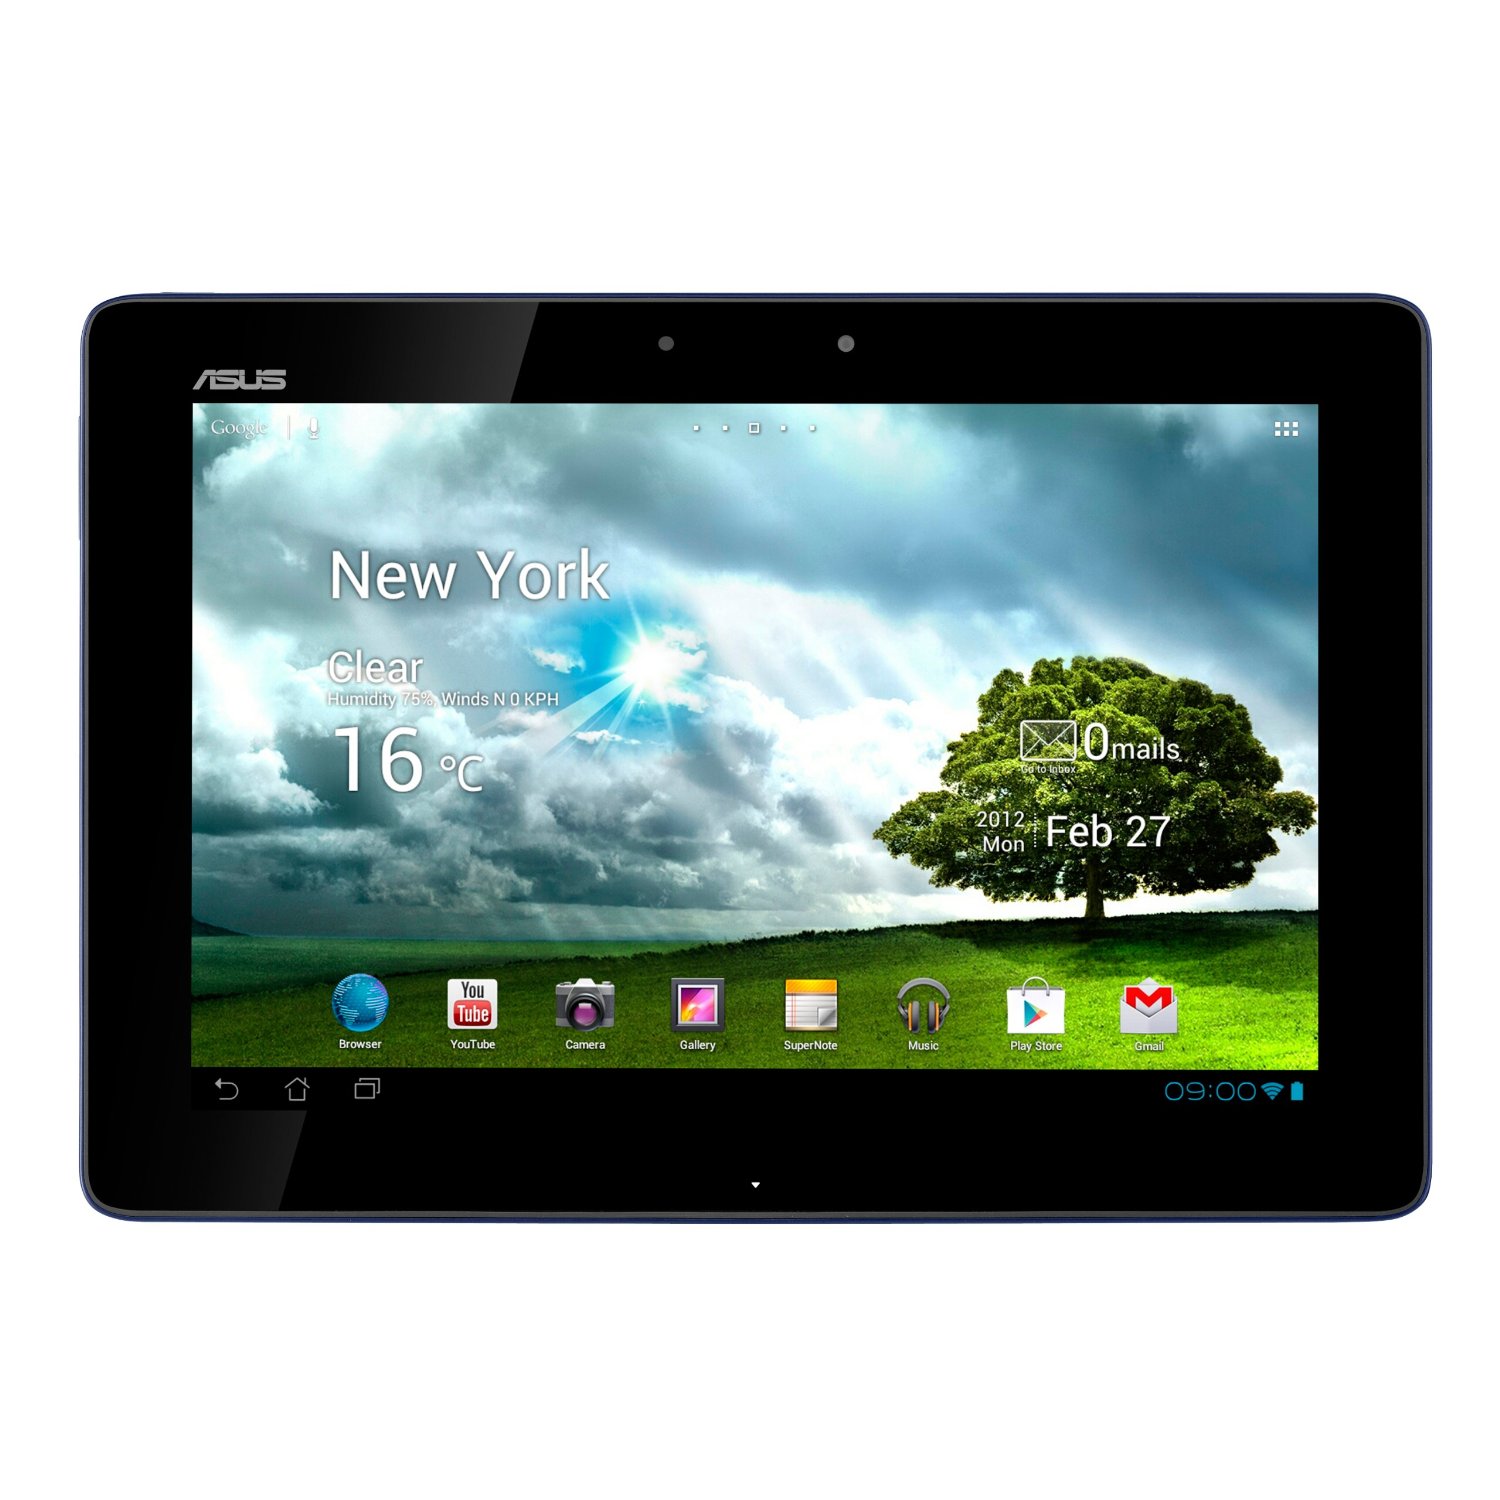 http://thetechjournal.com/wp-content/uploads/images/1205/1336496461-asus-transformer-tf300-tb1bl-101inch-tablet-1.jpg